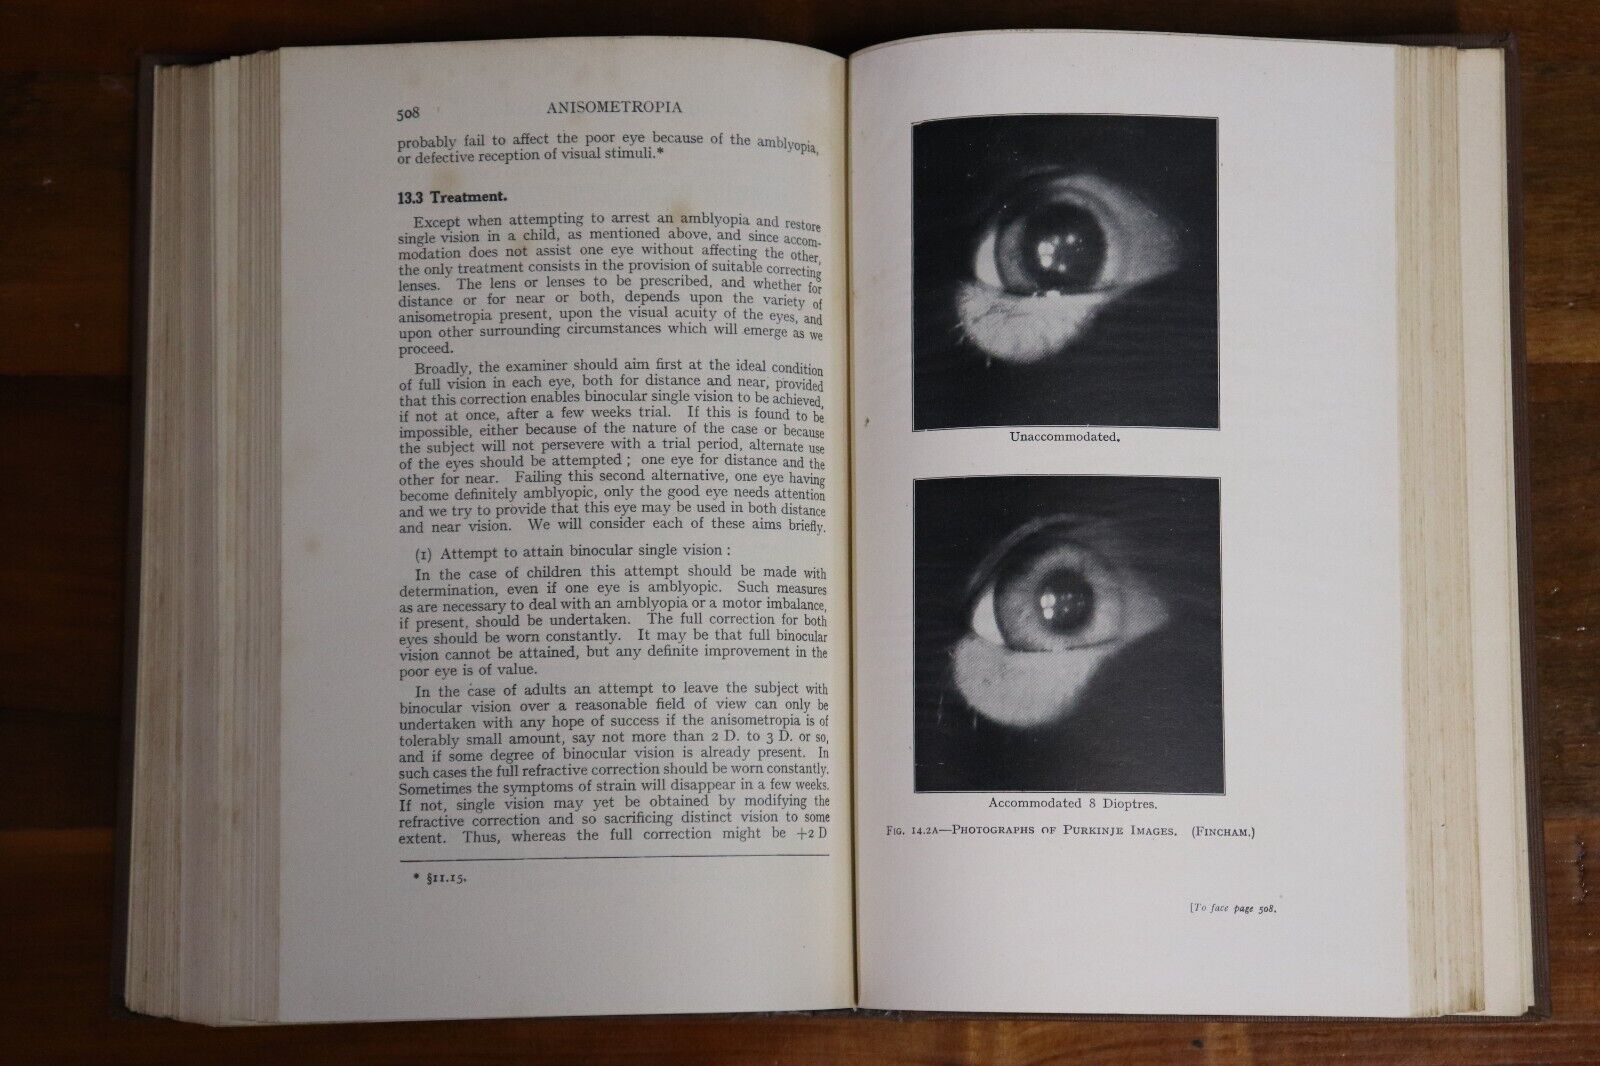 Visual Optics by HH Emsley - 1948 - Vintage Medical Optometry Reference Book